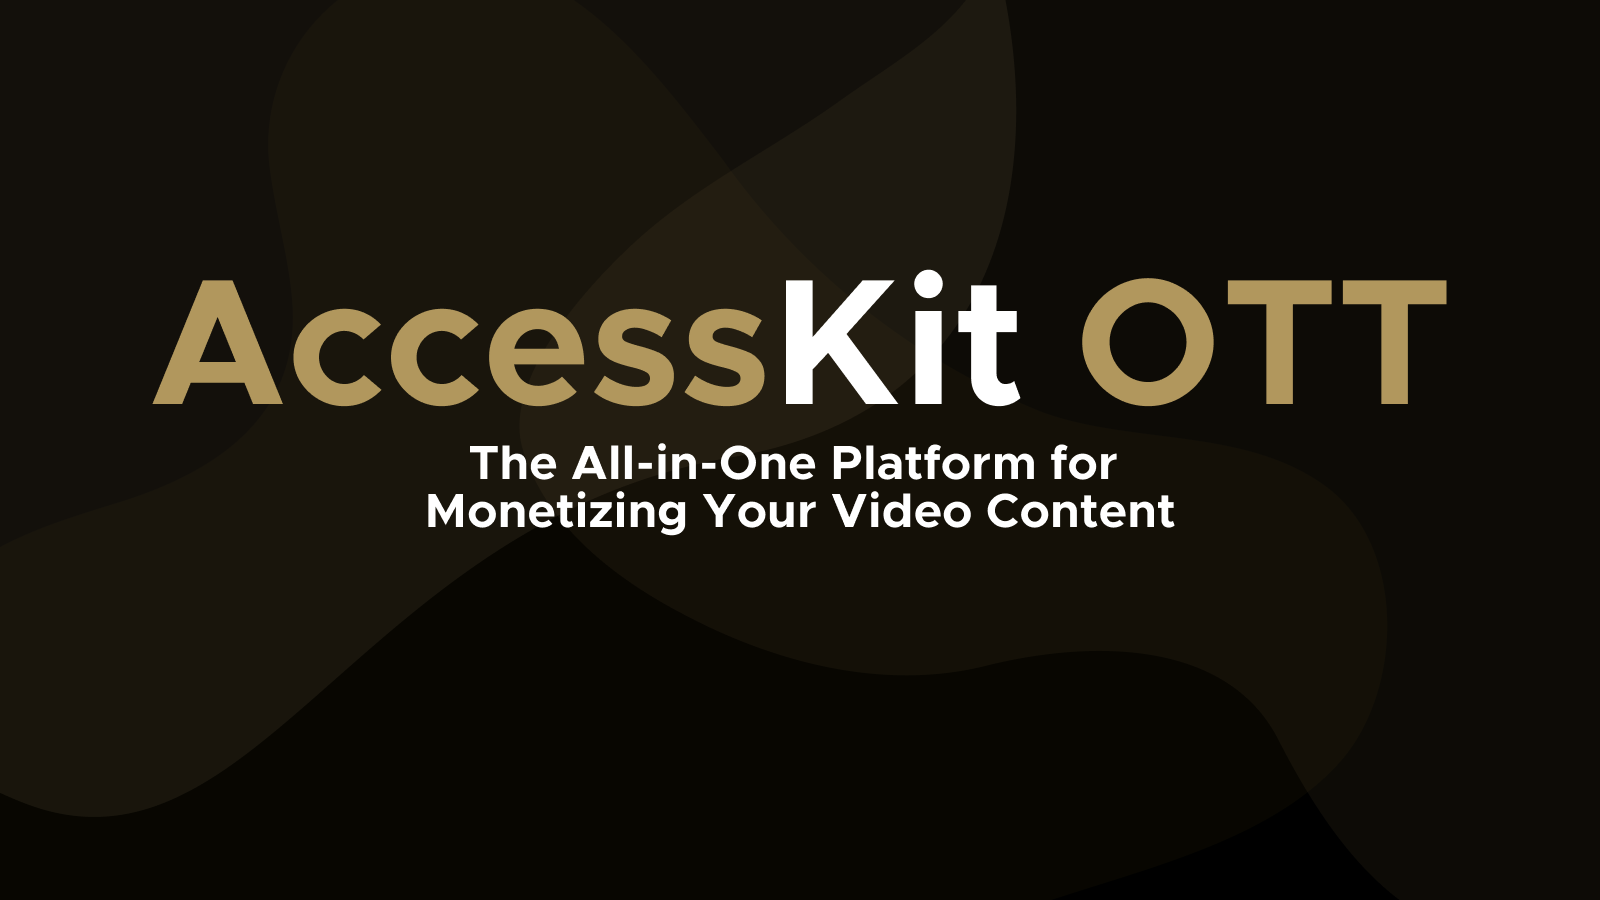 AccessKit OTT: The All-in-One Platform for Monetizing Your Video Content